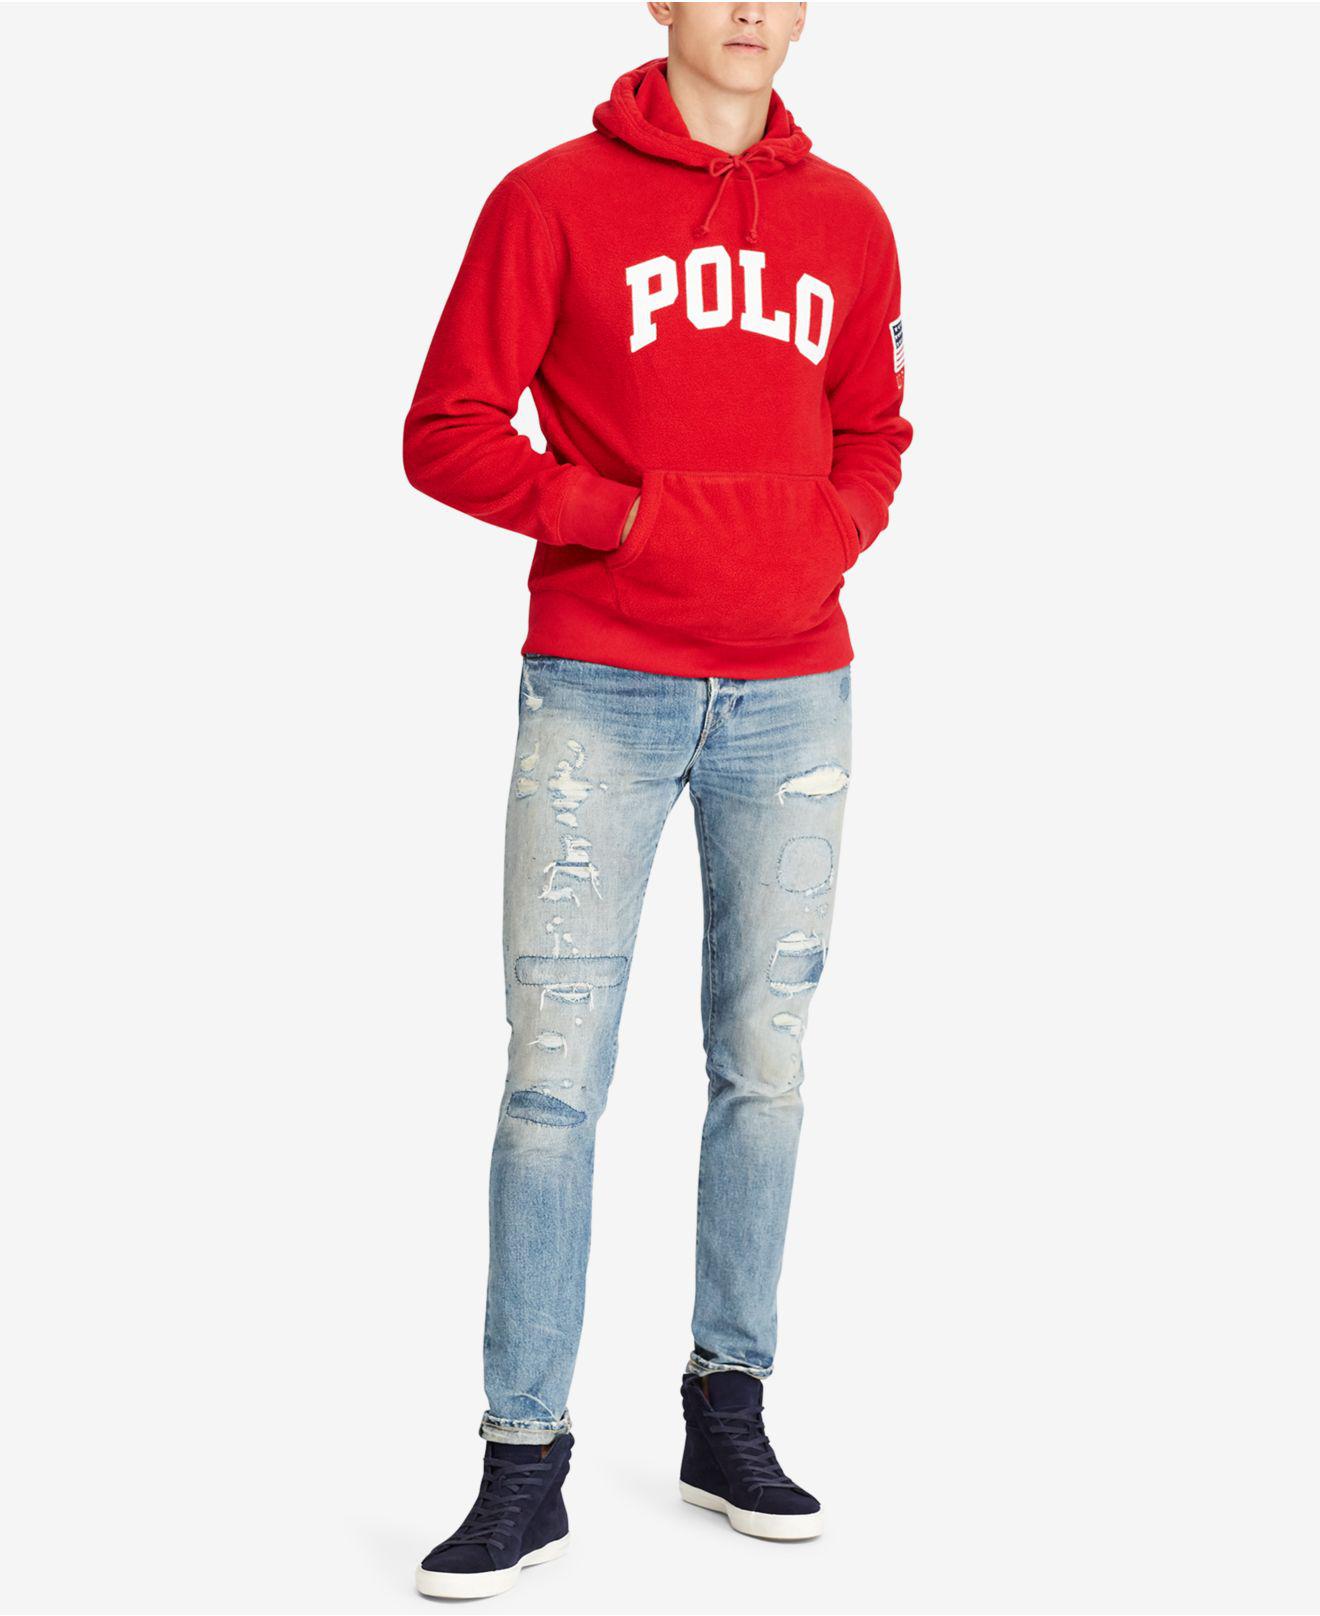 red and white polo hoodie